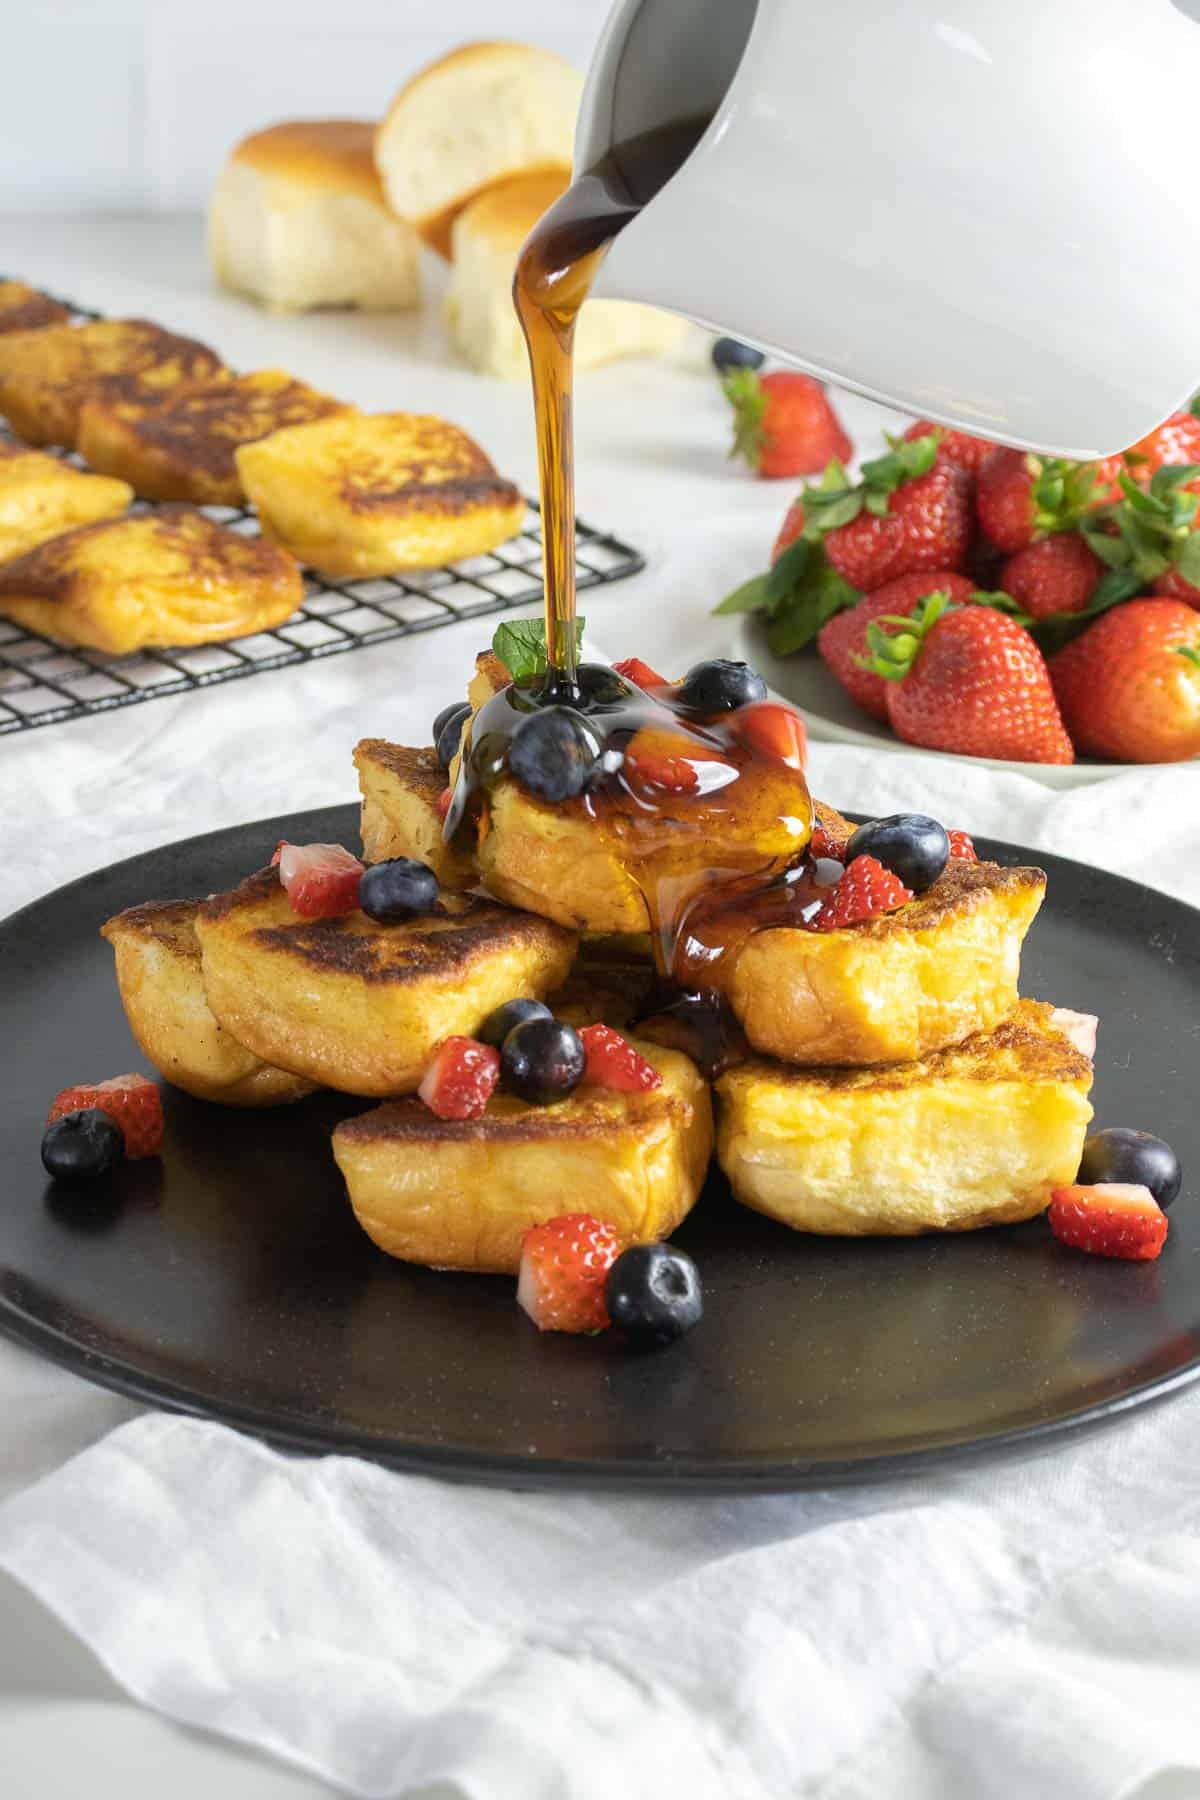 Hawaiian sweet bread French toast on a plate with berries and maple syrup.